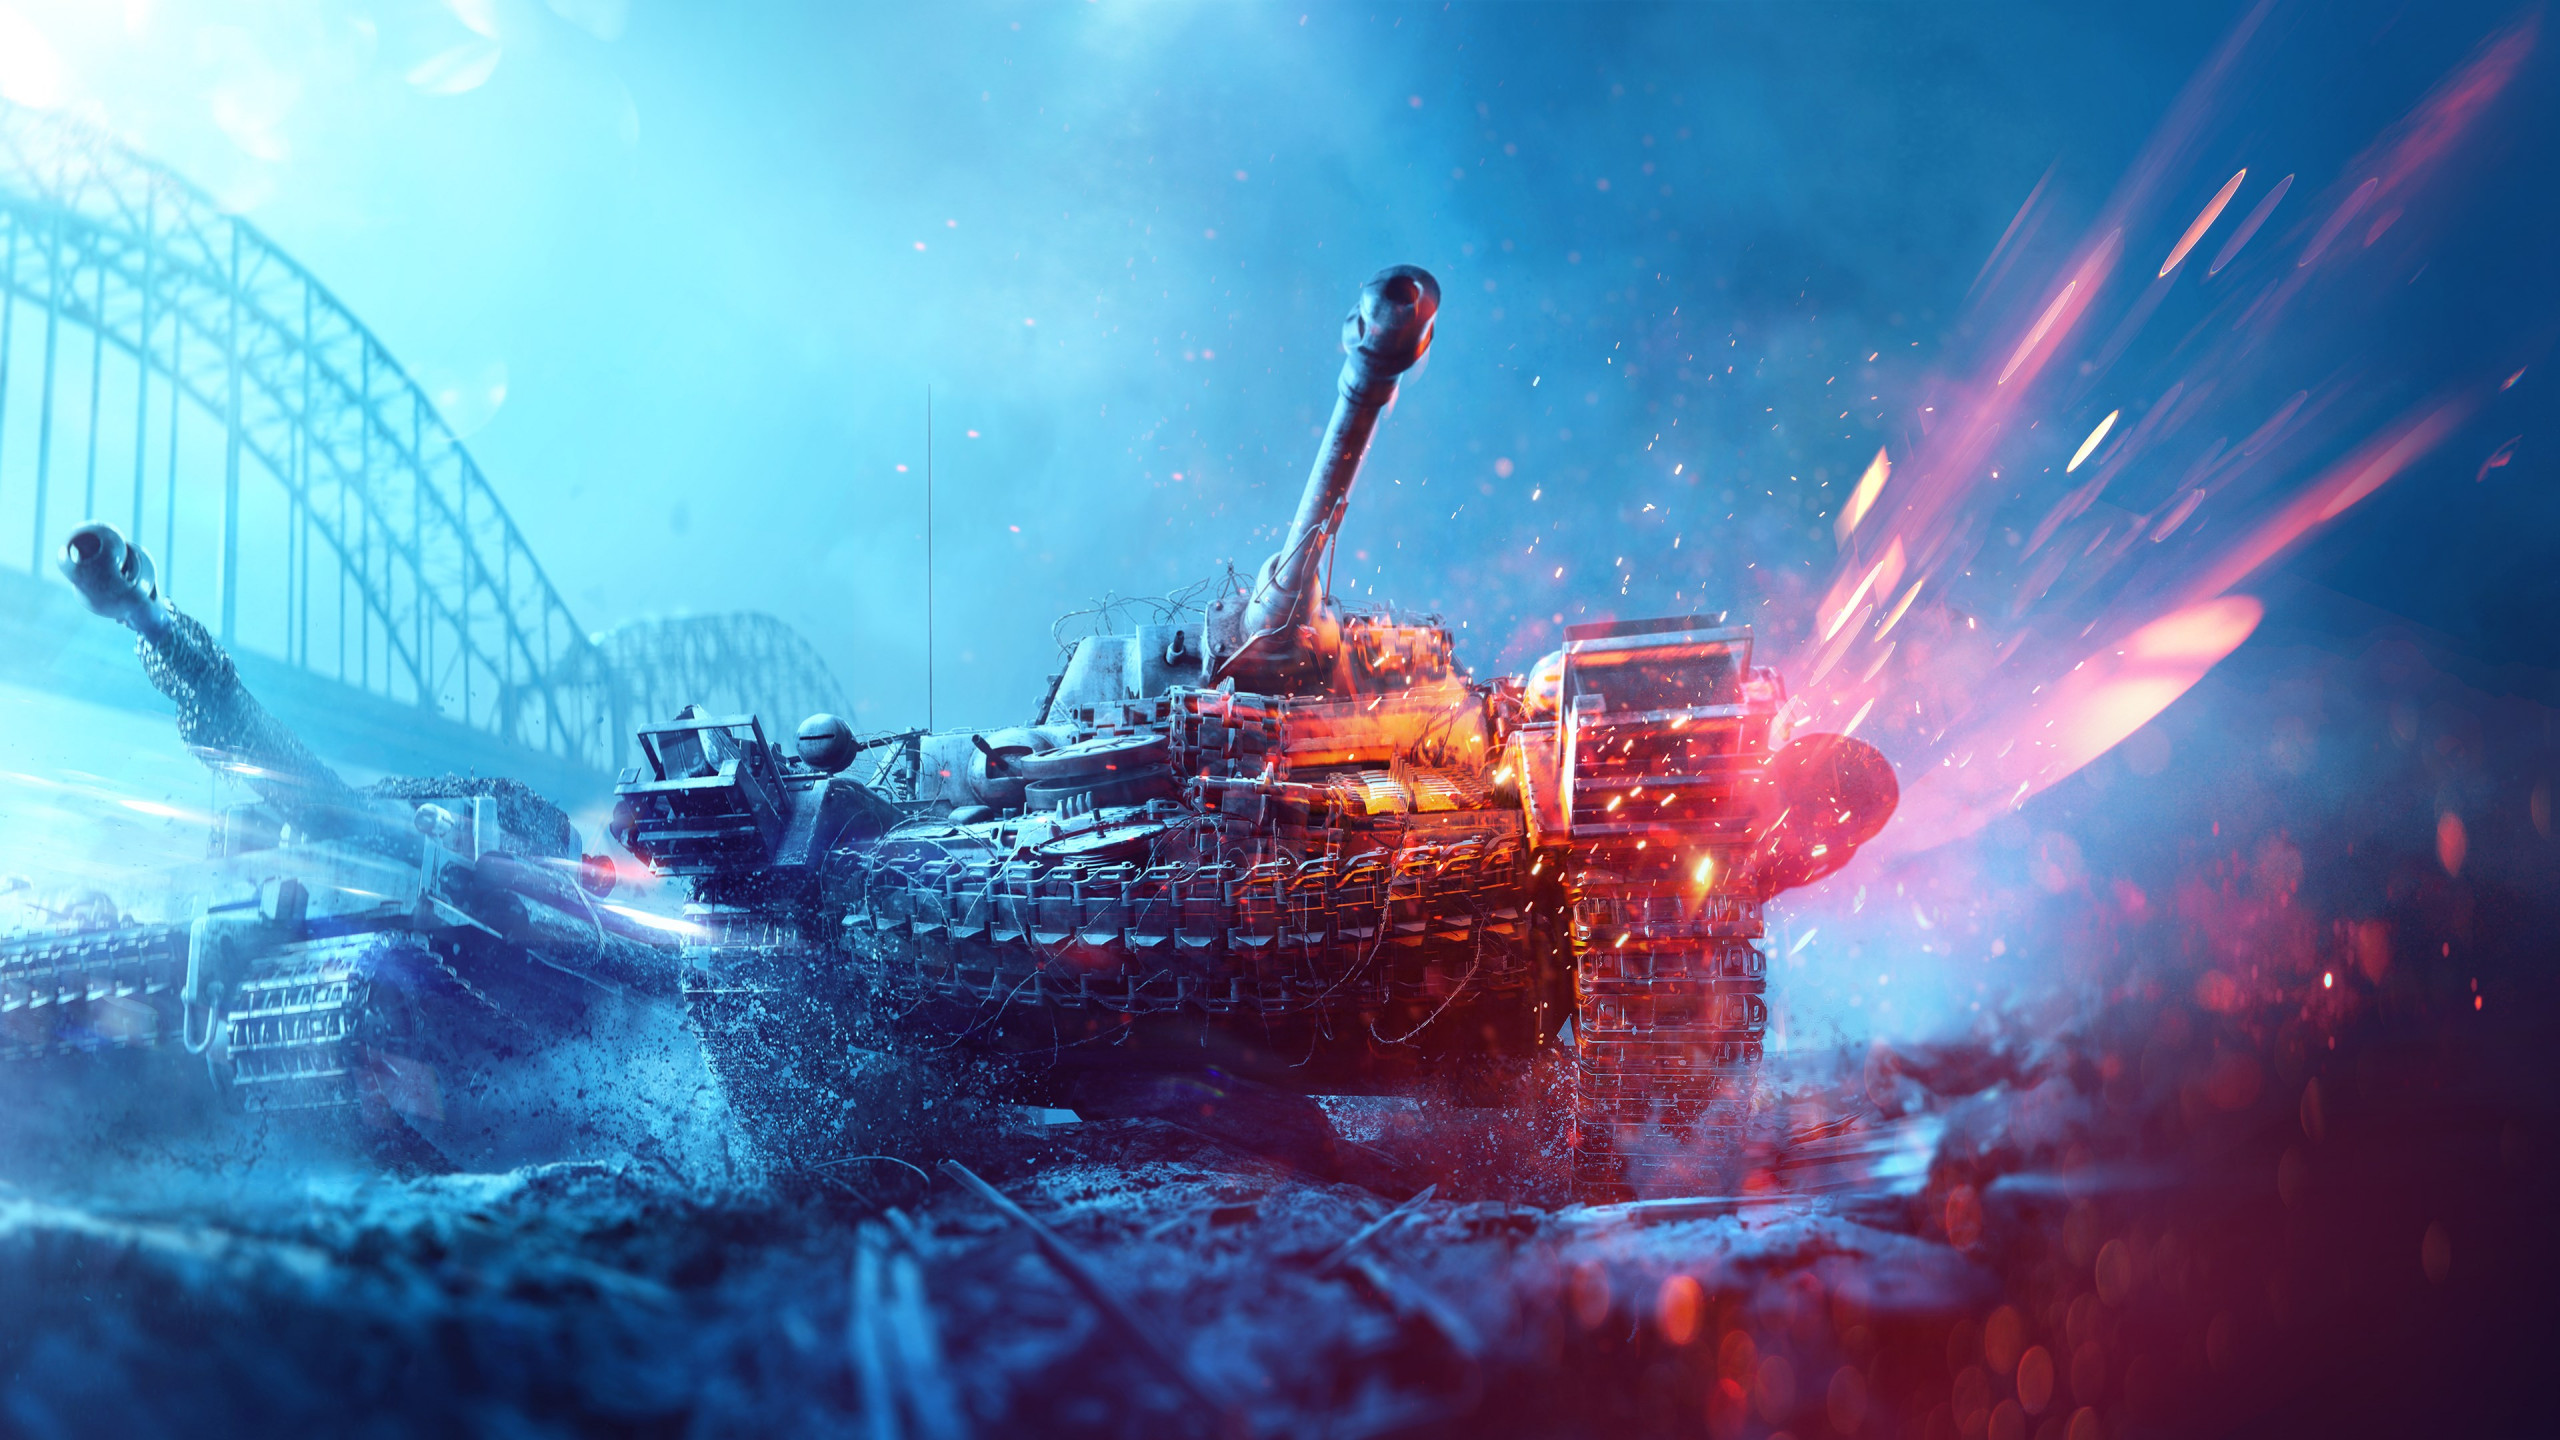 Battlefield 5 poster with tanks wallpaper 2560x1440